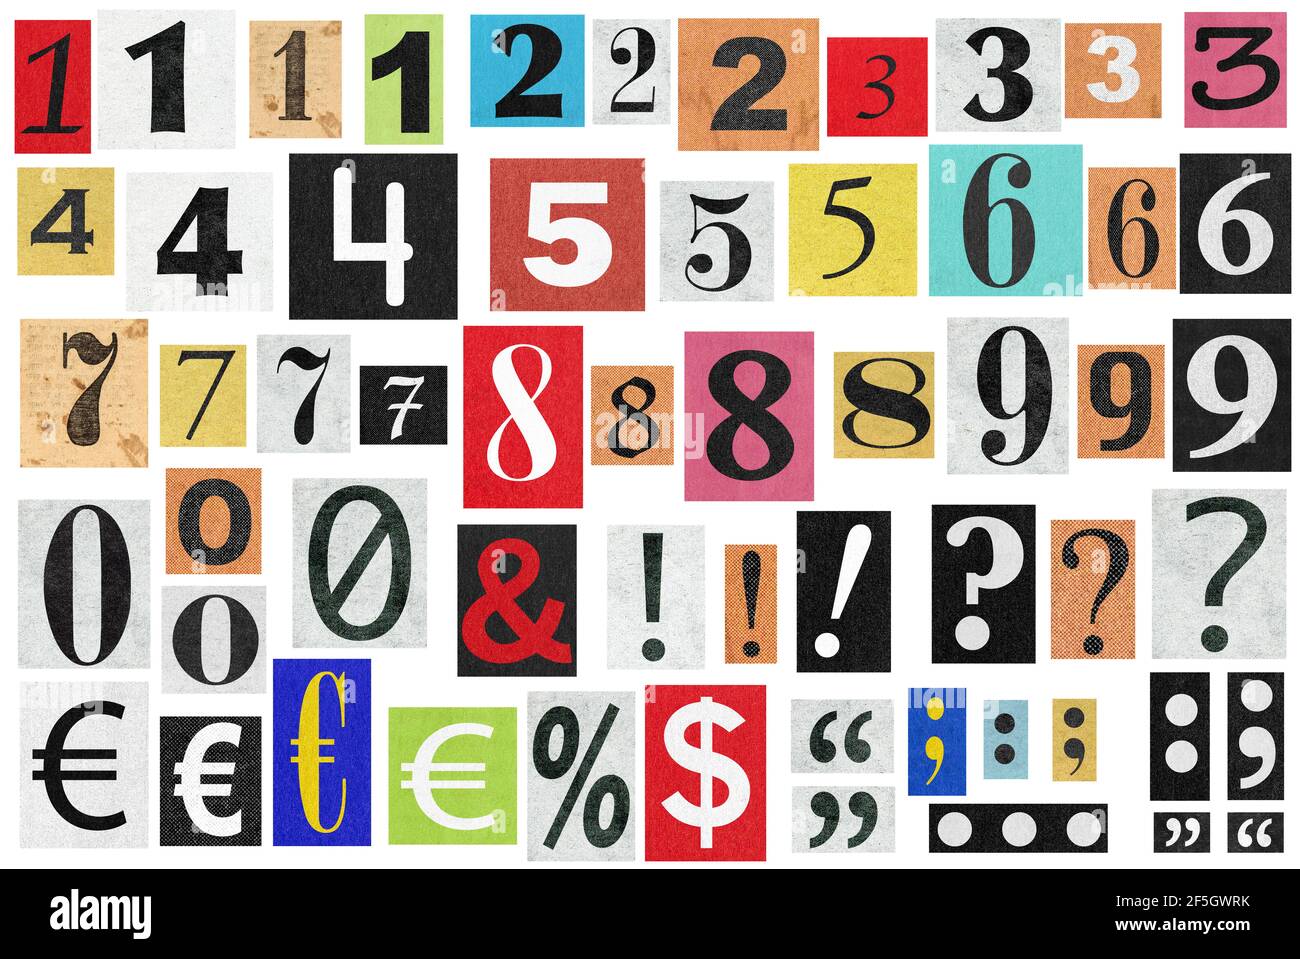 Newspaper Magazine Alphabet Letters Numbers High Resolution Stock Photography And Images Alamy